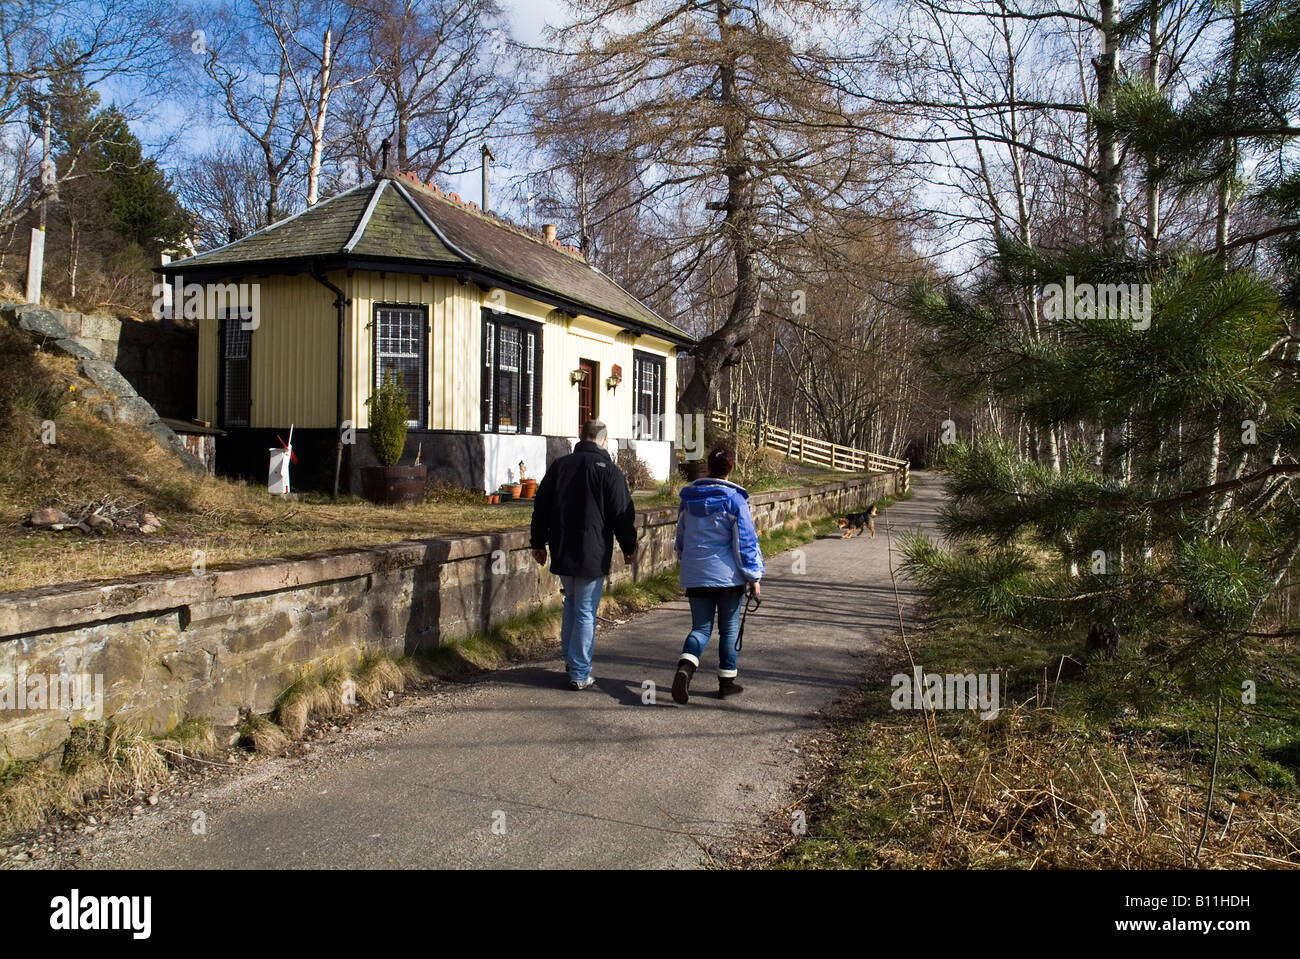 dh Cambus O May ROYAL DEESIDE ABERDEENSHIRE Couple walking on footpath past old railway line station people hikers in scotland hiking highland Stock Photo